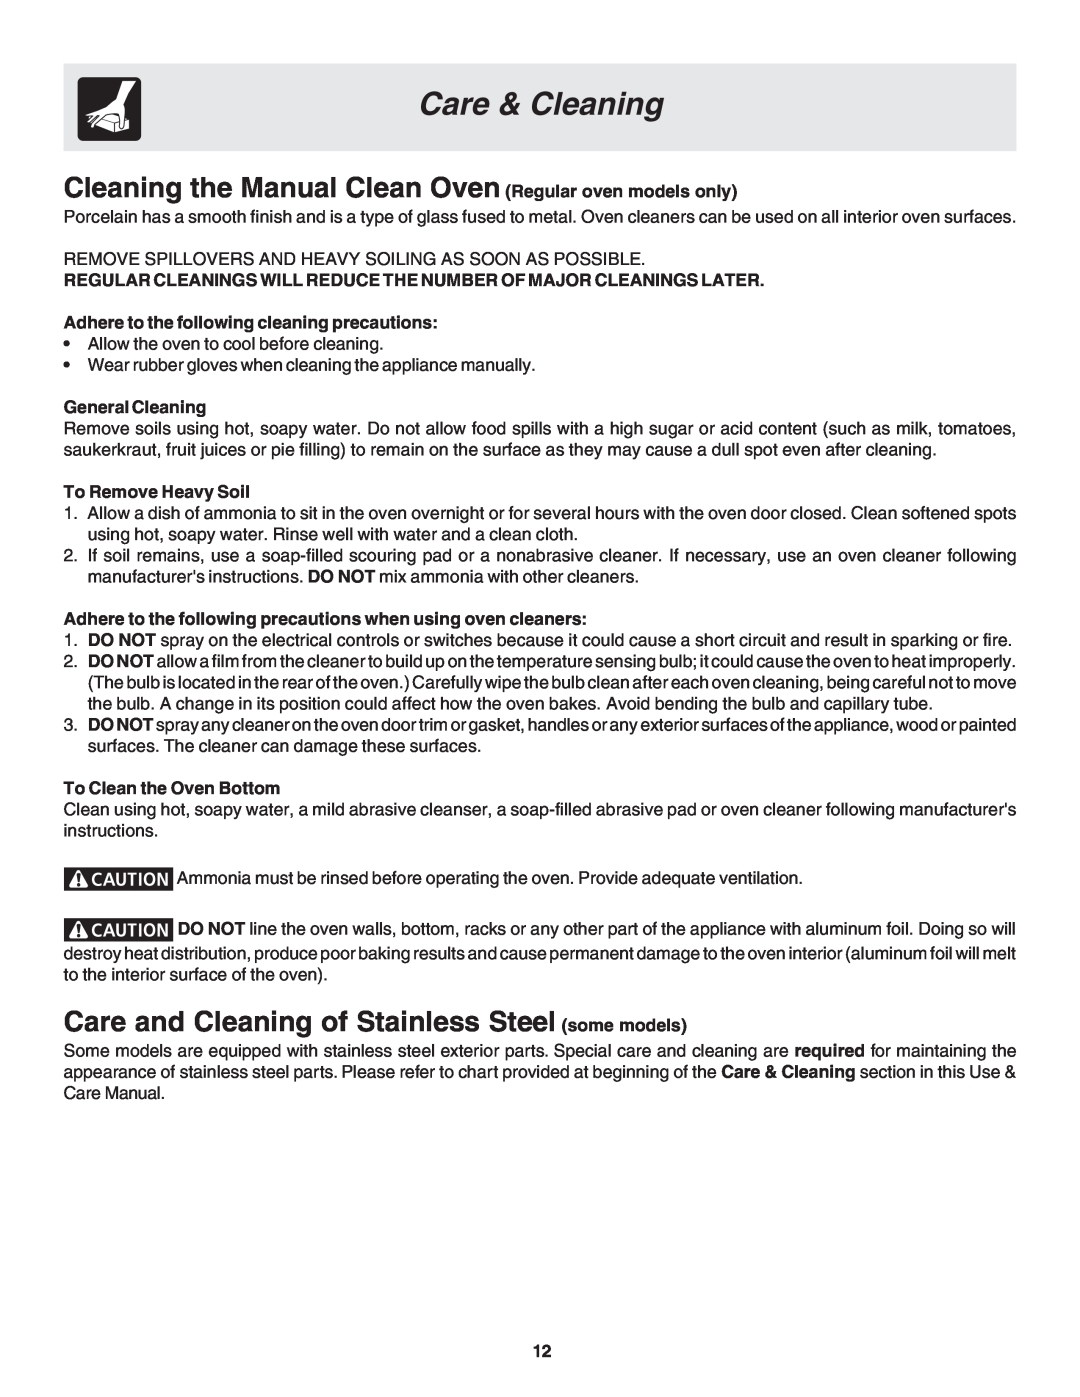 Frigidaire 318200944 manual Cleaning the Manual Clean Oven Regular oven models only, General Cleaning, To Remove Heavy Soil 